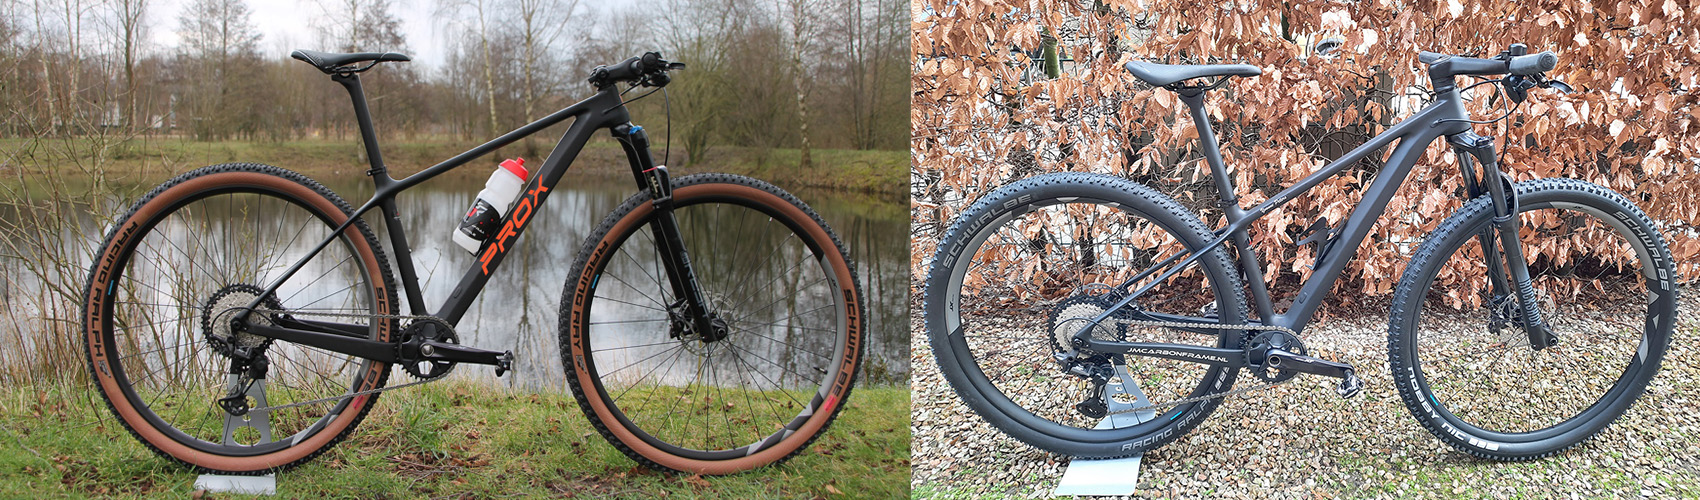 complete bikes built with PXM909 hardtail carbon frame